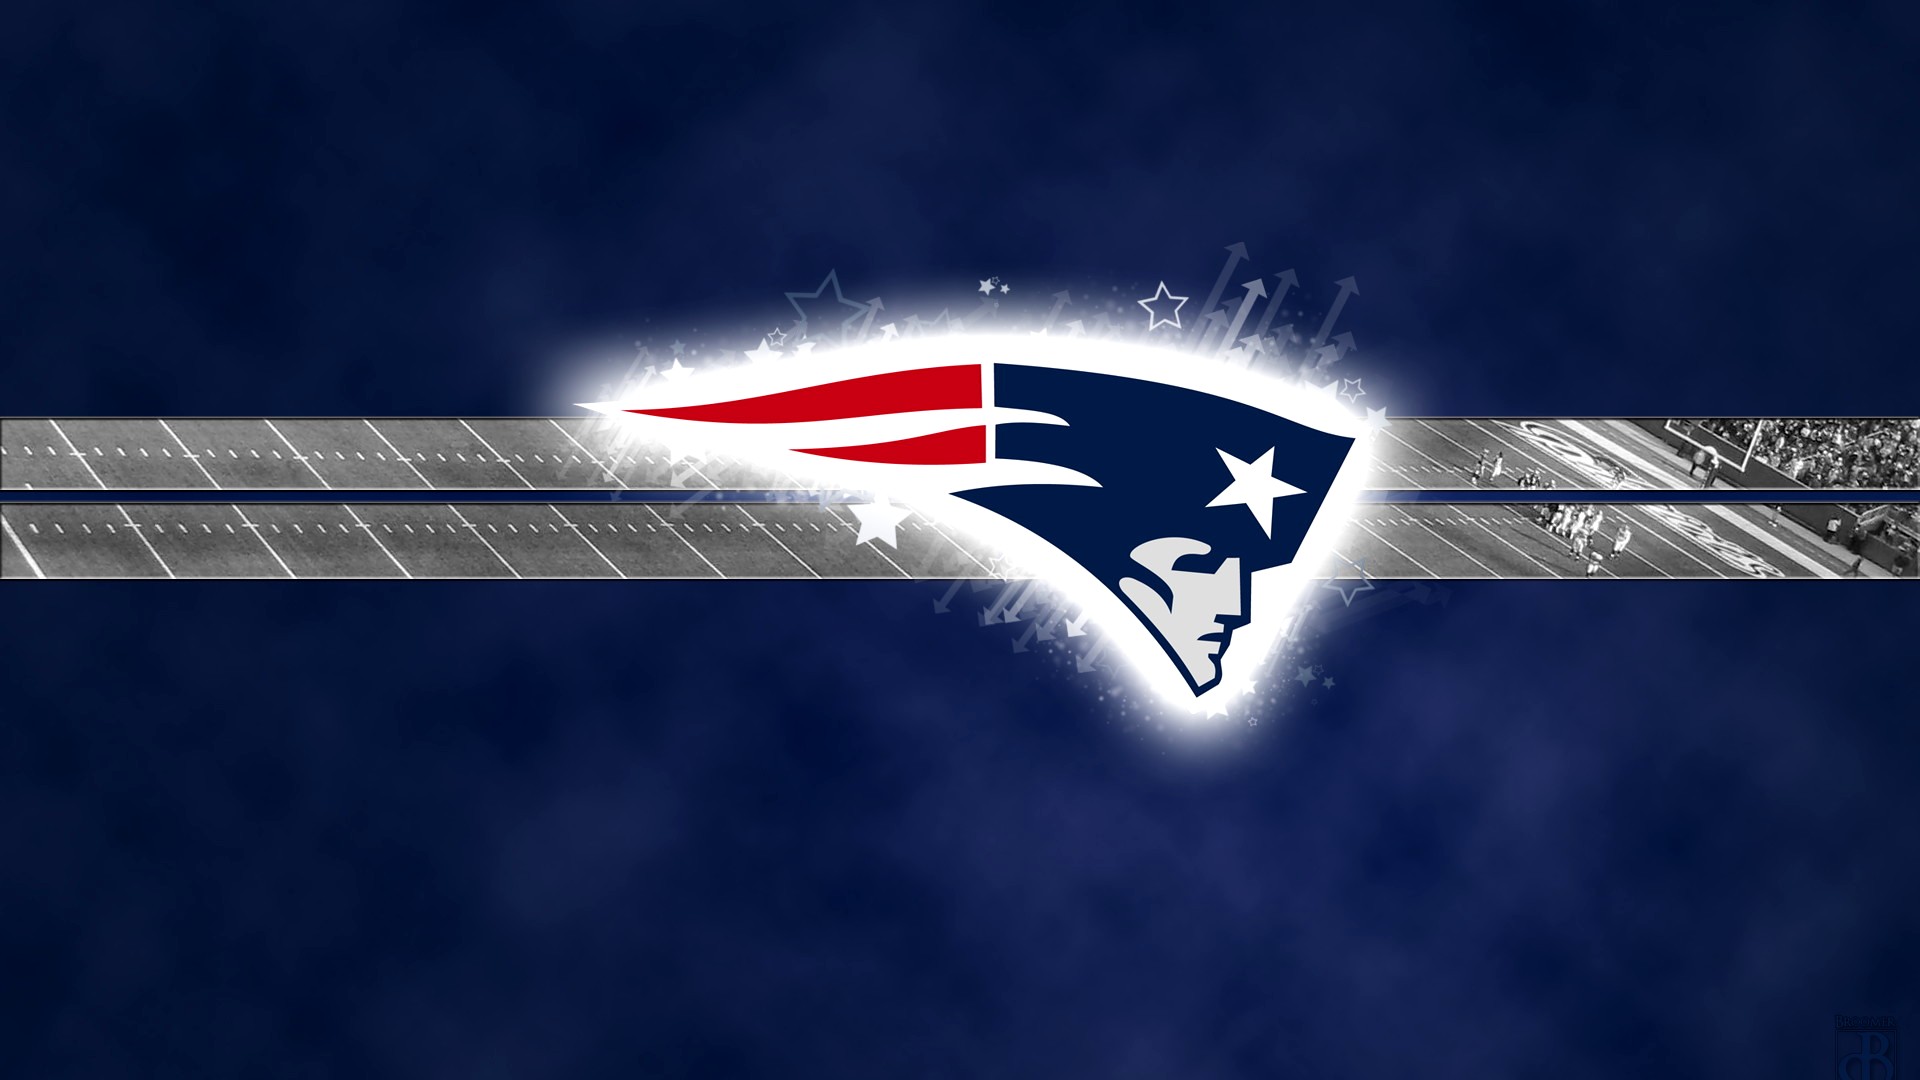 Best New England Patriots Wallpaper in HD with high-resolution 1920x1080 pixel. You can use and set as wallpaper for Notebook Screensavers, Mac Wallpapers, Mobile Home Screen, iPhone or Android Phones Lock Screen